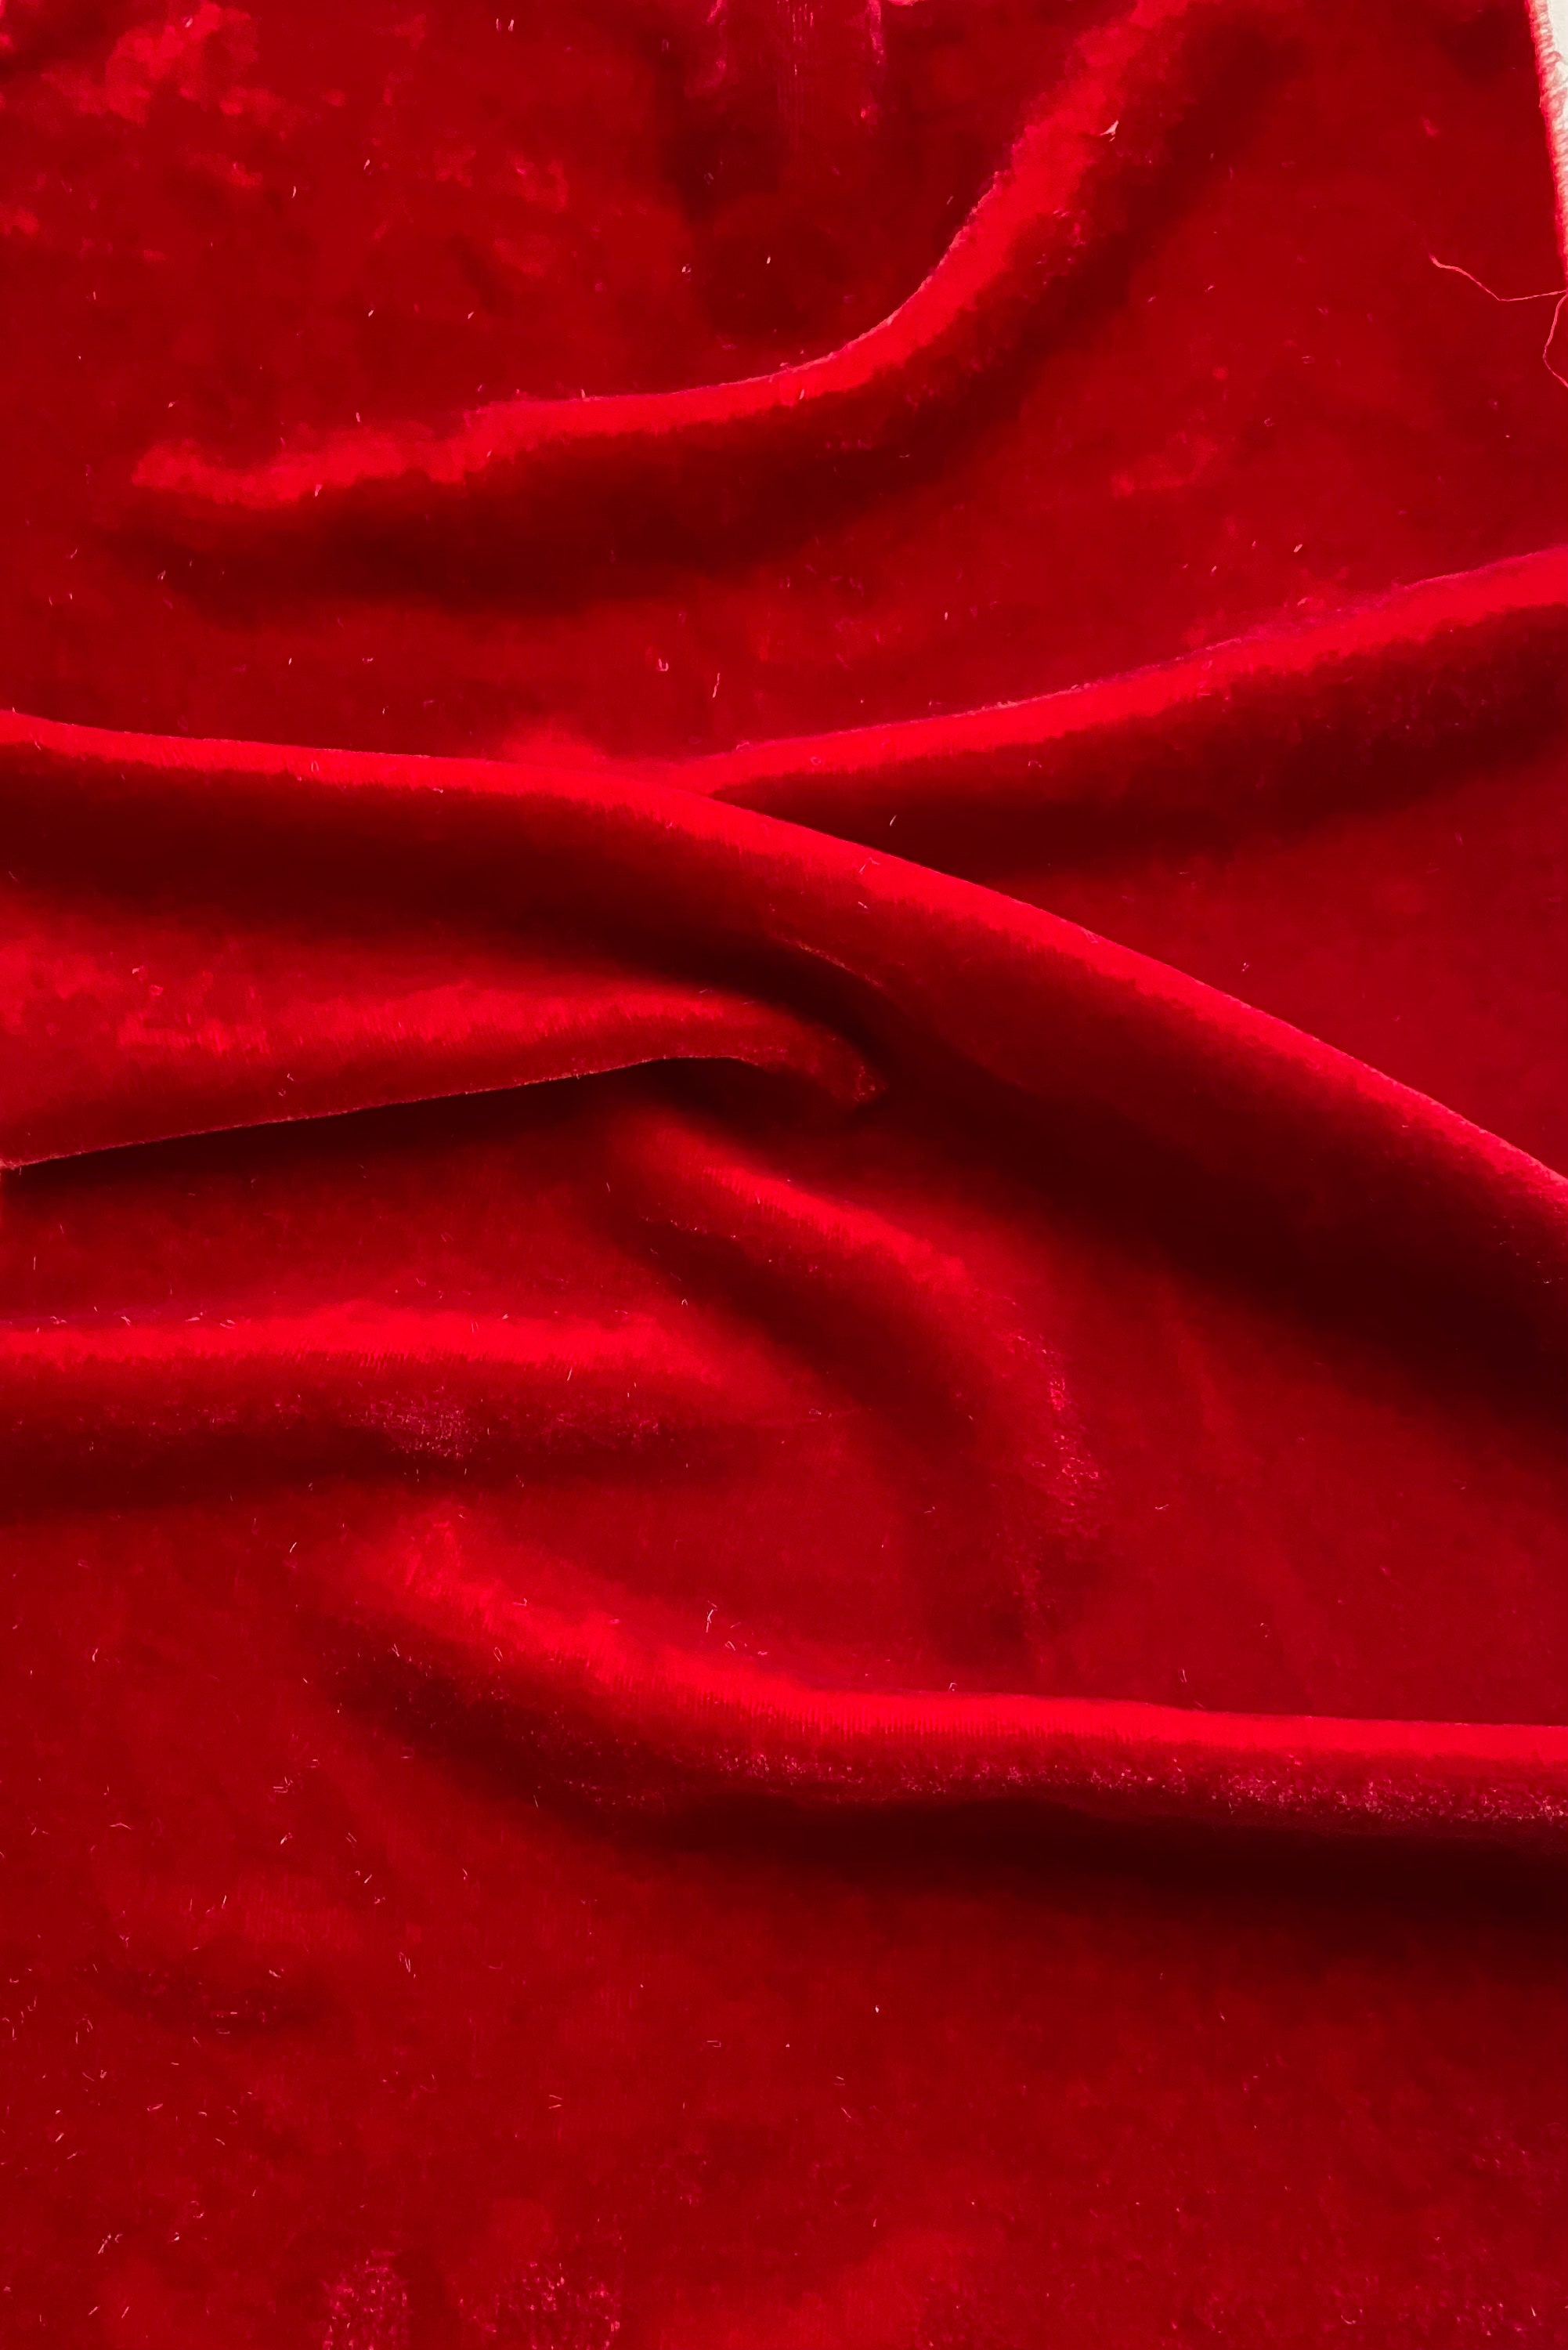 Dark Red Velvet Fabric by the Yard, Lux Red Velour Fabric With Stretch,  Wine Color Velvet Material, Red Crushed Velvet for Dress Skirt Top 